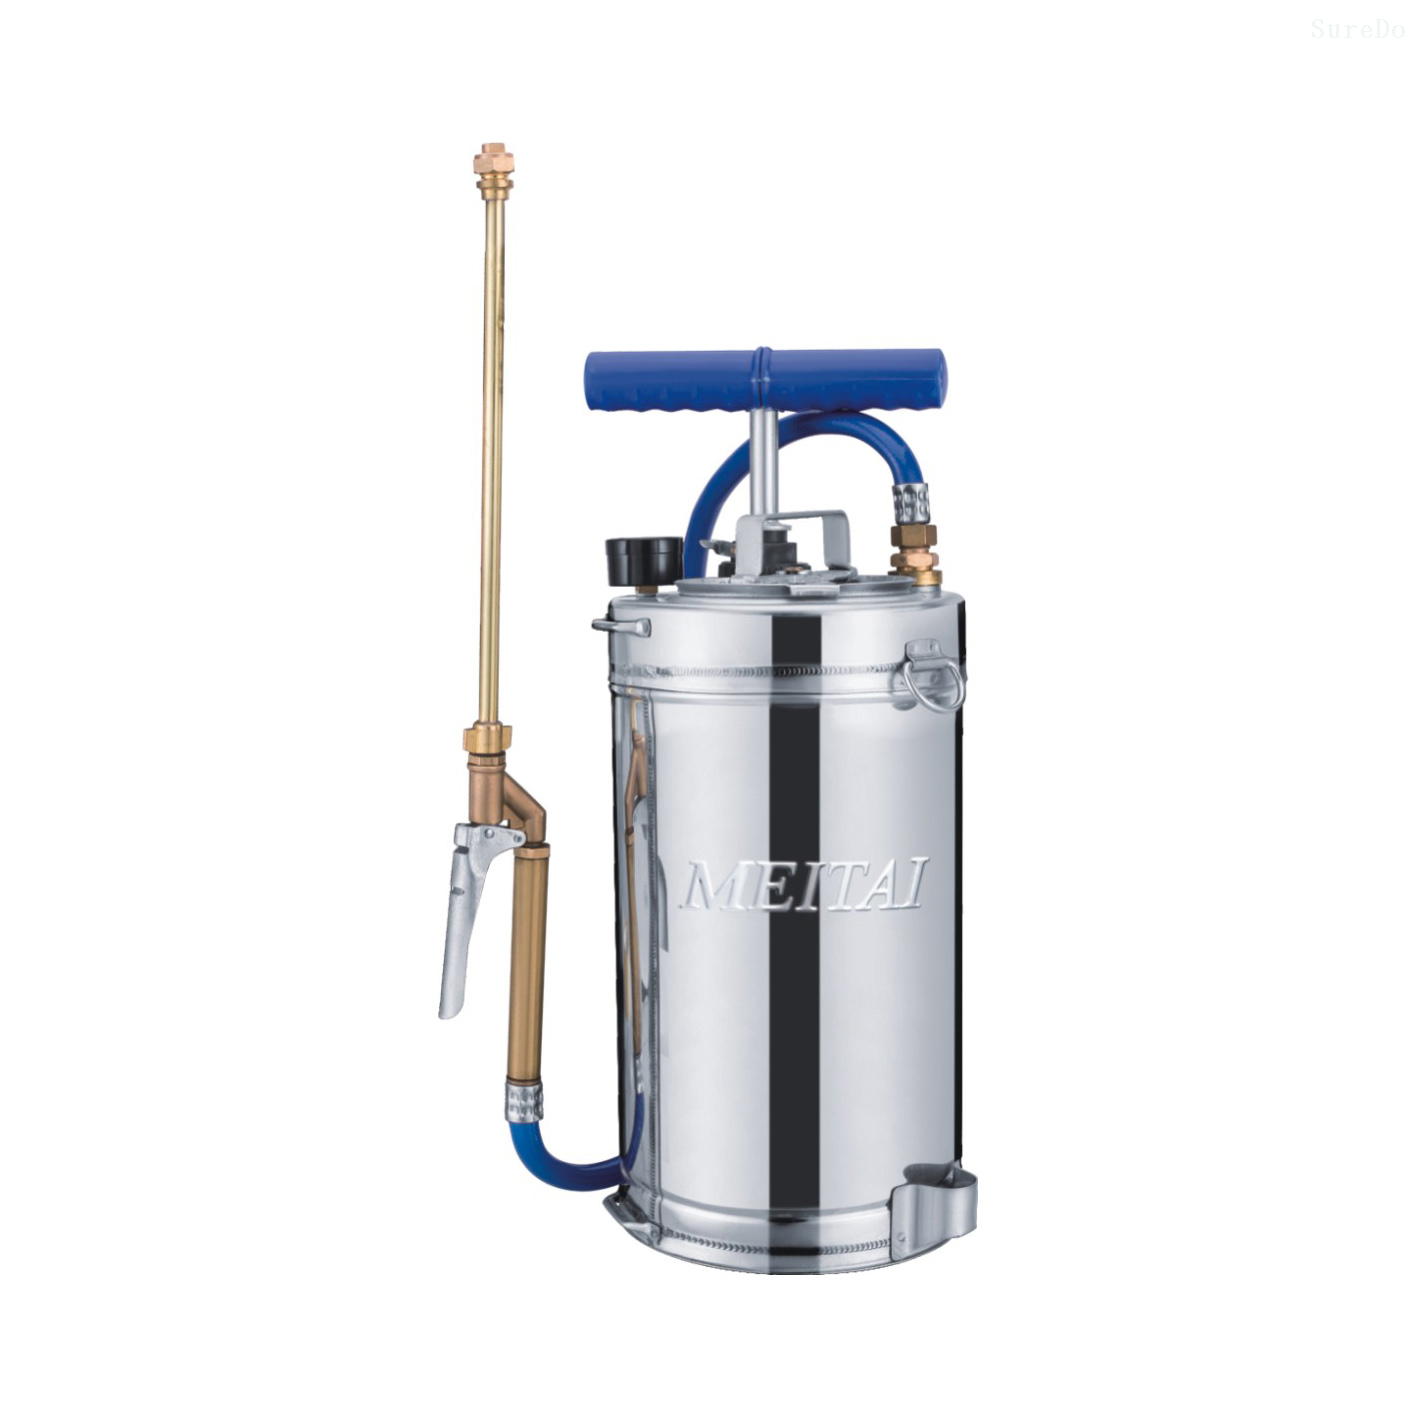 5-14 Liter Premier Stainless Steel Pesticide And Fertilizers Sprayer For Garden And Home